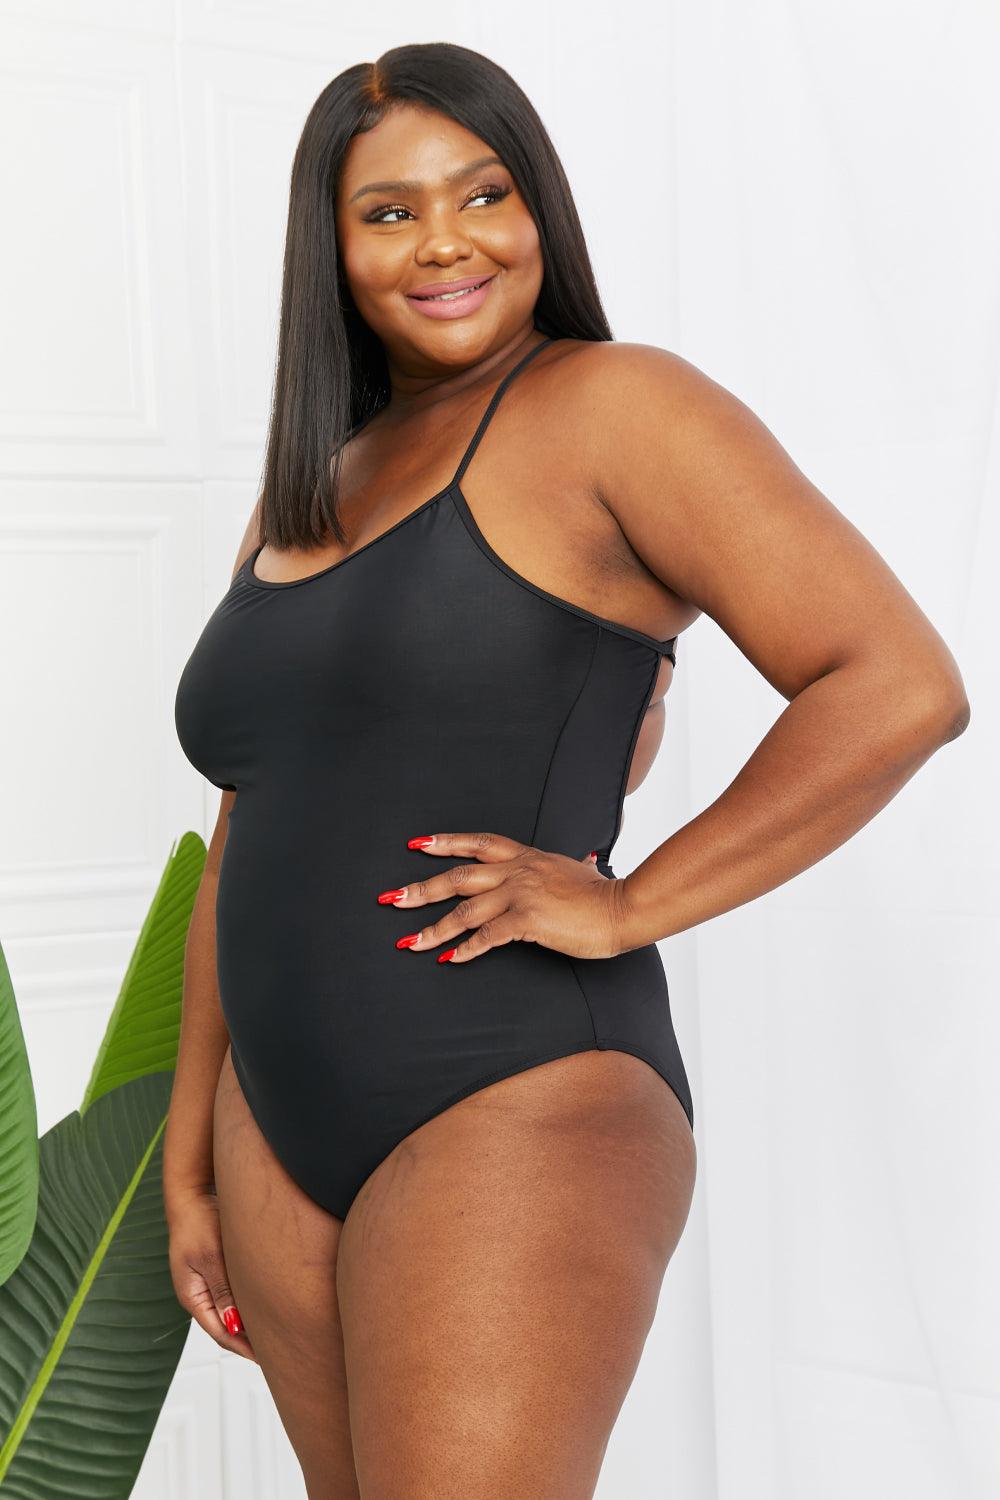 Marina West Swim High Tide One-Piece in Black - God's Girl Gifts And Apparel